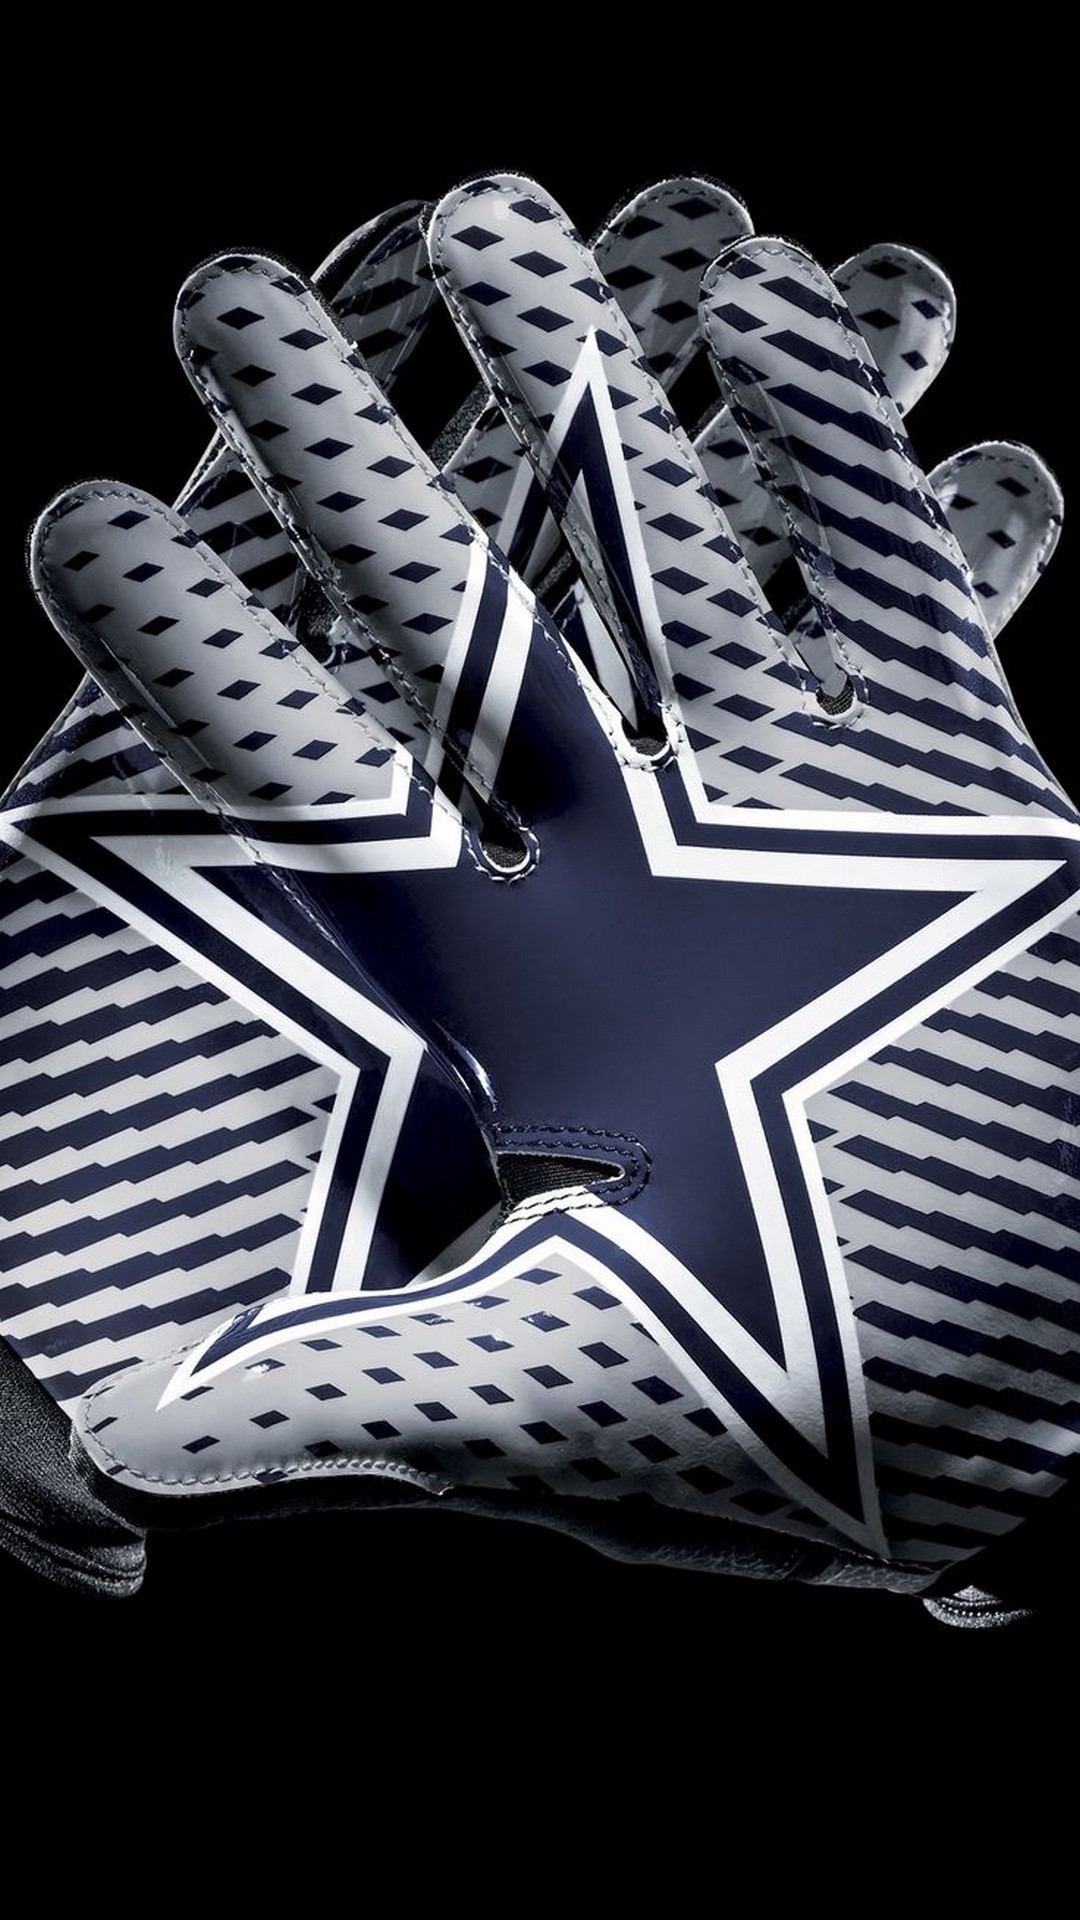 Dallas Cowboys iPhone 6 Wallpaper with high-resolution 1080x1920 pixel. Download and set as wallpaper for Apple iPhone X, XS Max, XR, 8, 7, 6, SE, iPad, Android